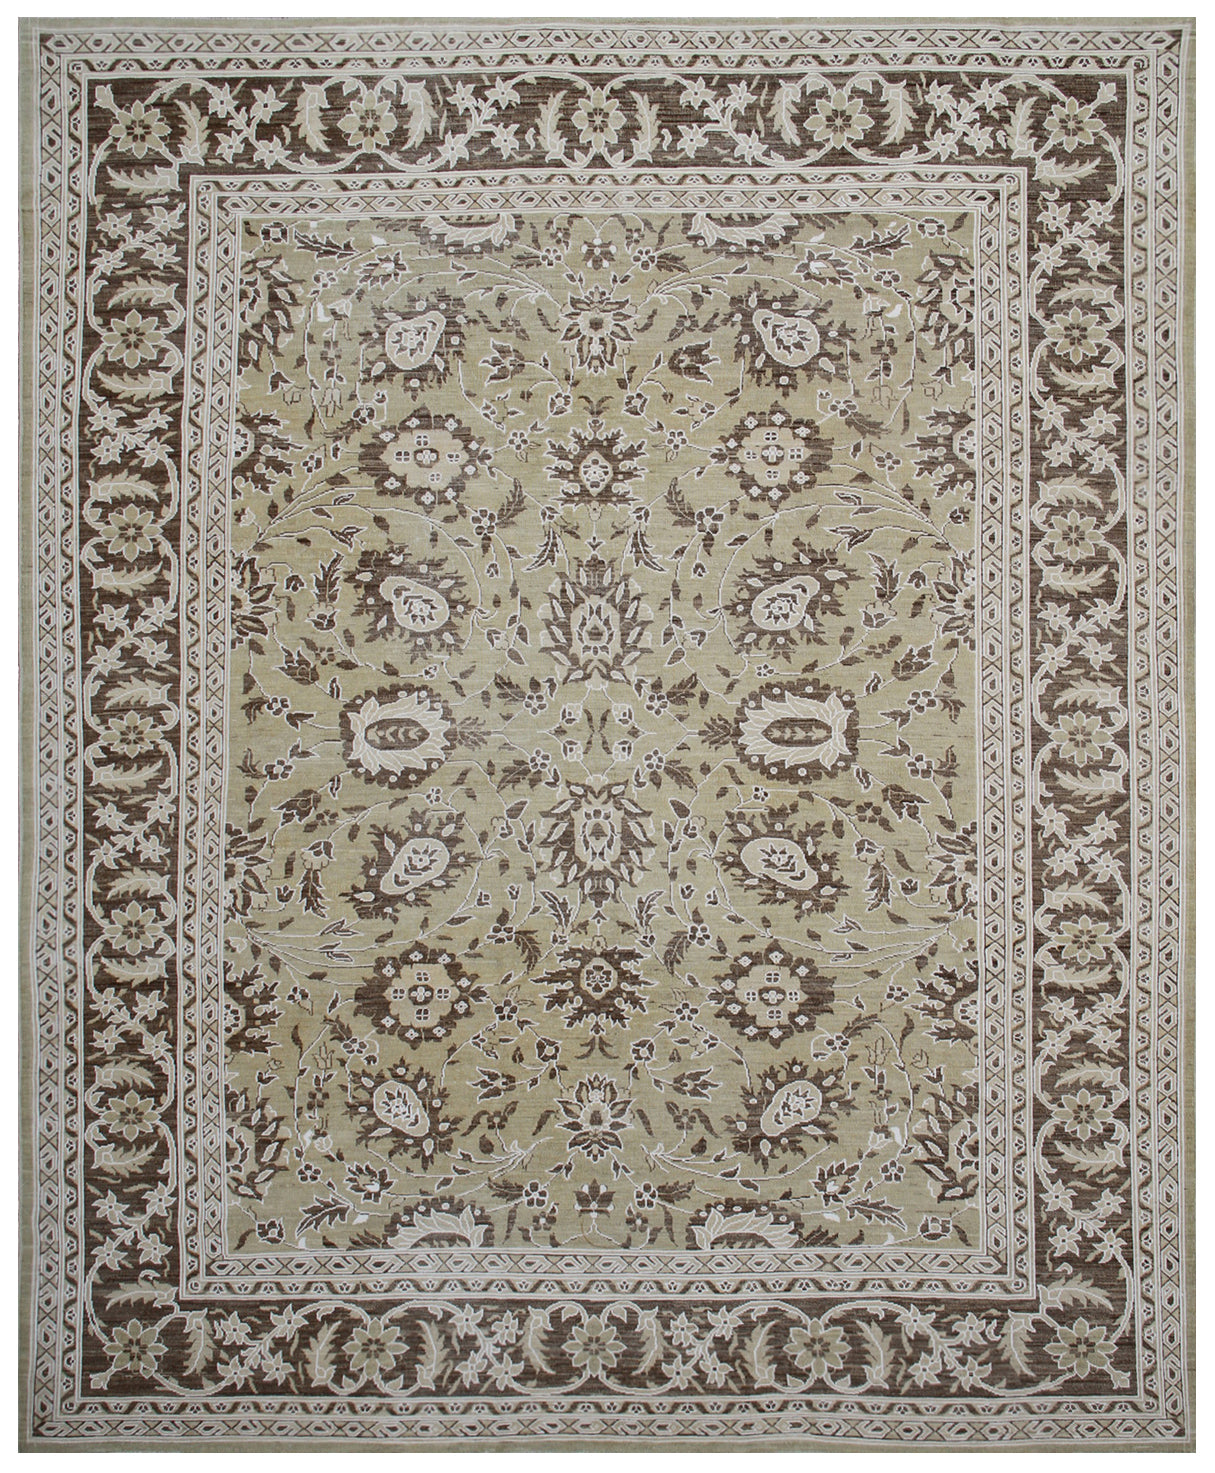 10.00 x 8.00 Sultanabad Design Wool and Cotton Beige Tan Ariana Transitional Area Rug